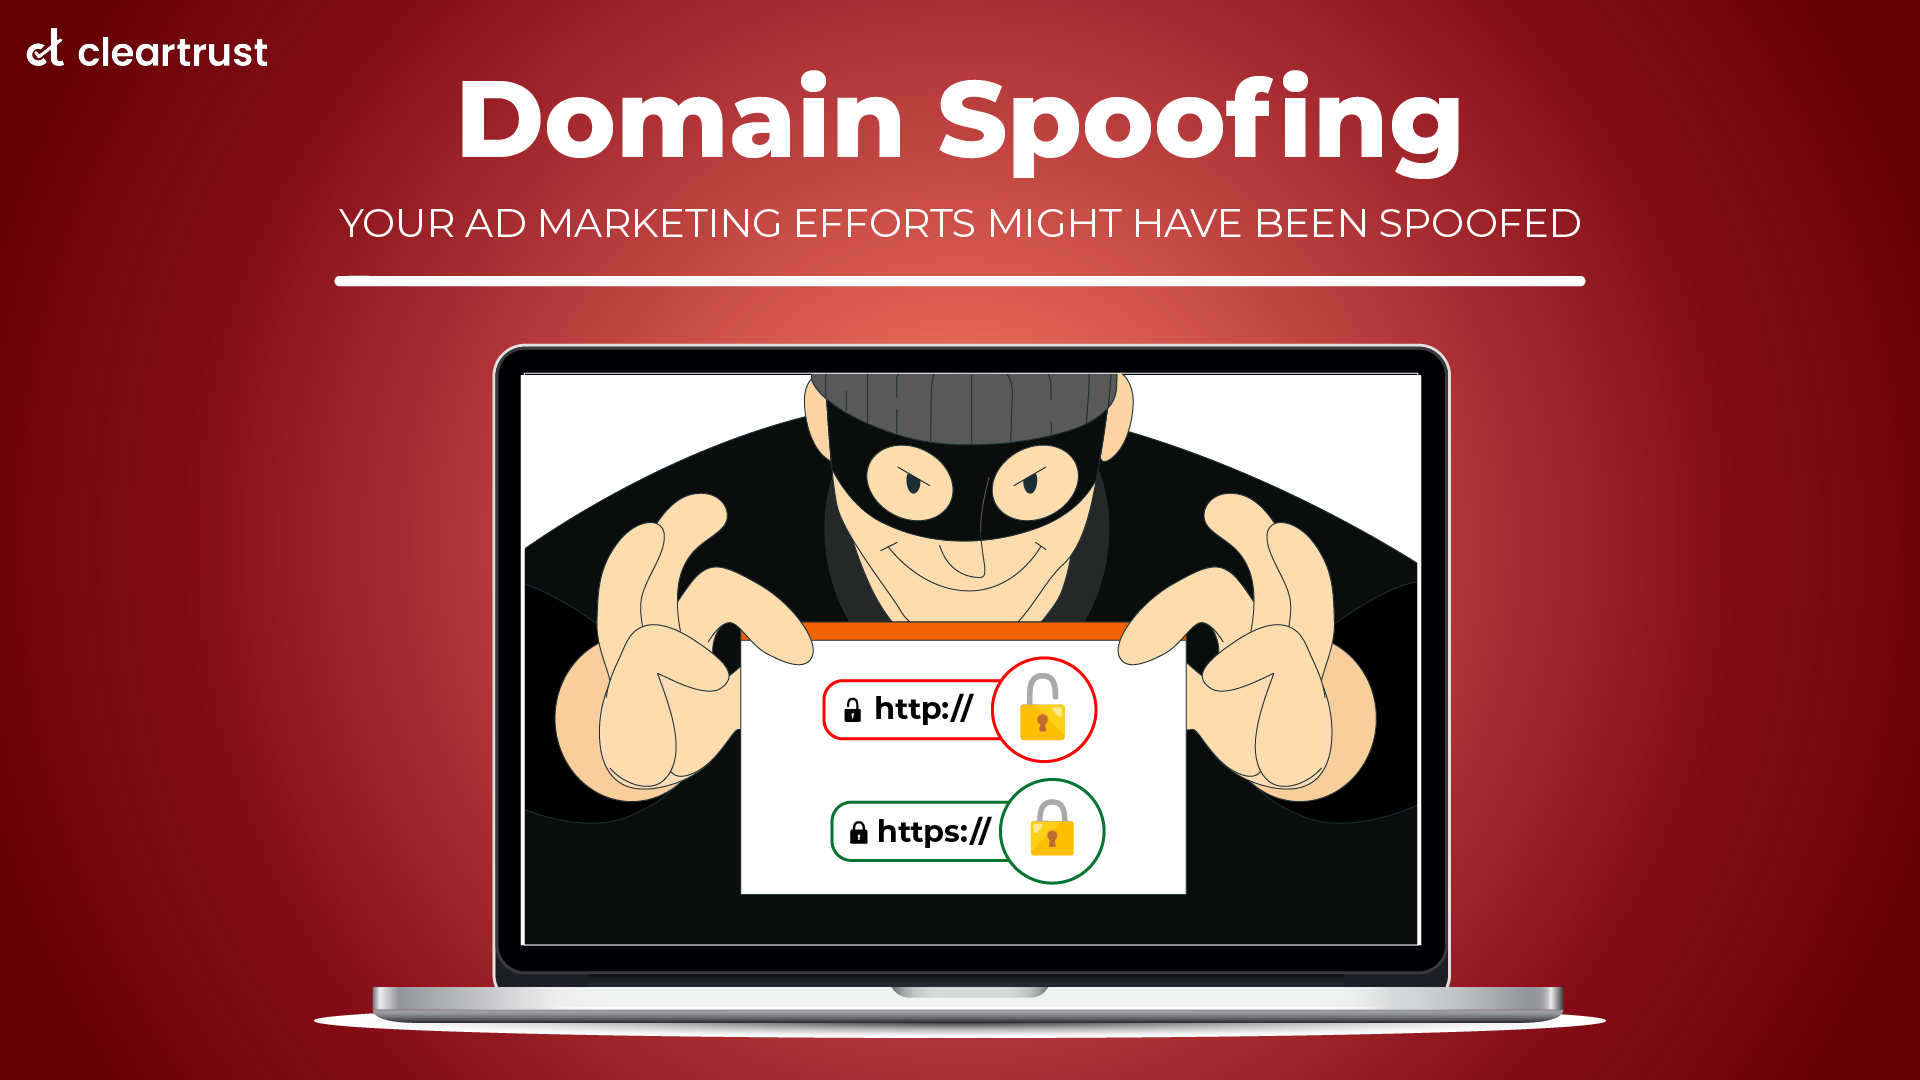 Domain Spoofing - Your ad marketing efforts might have been spoofed 